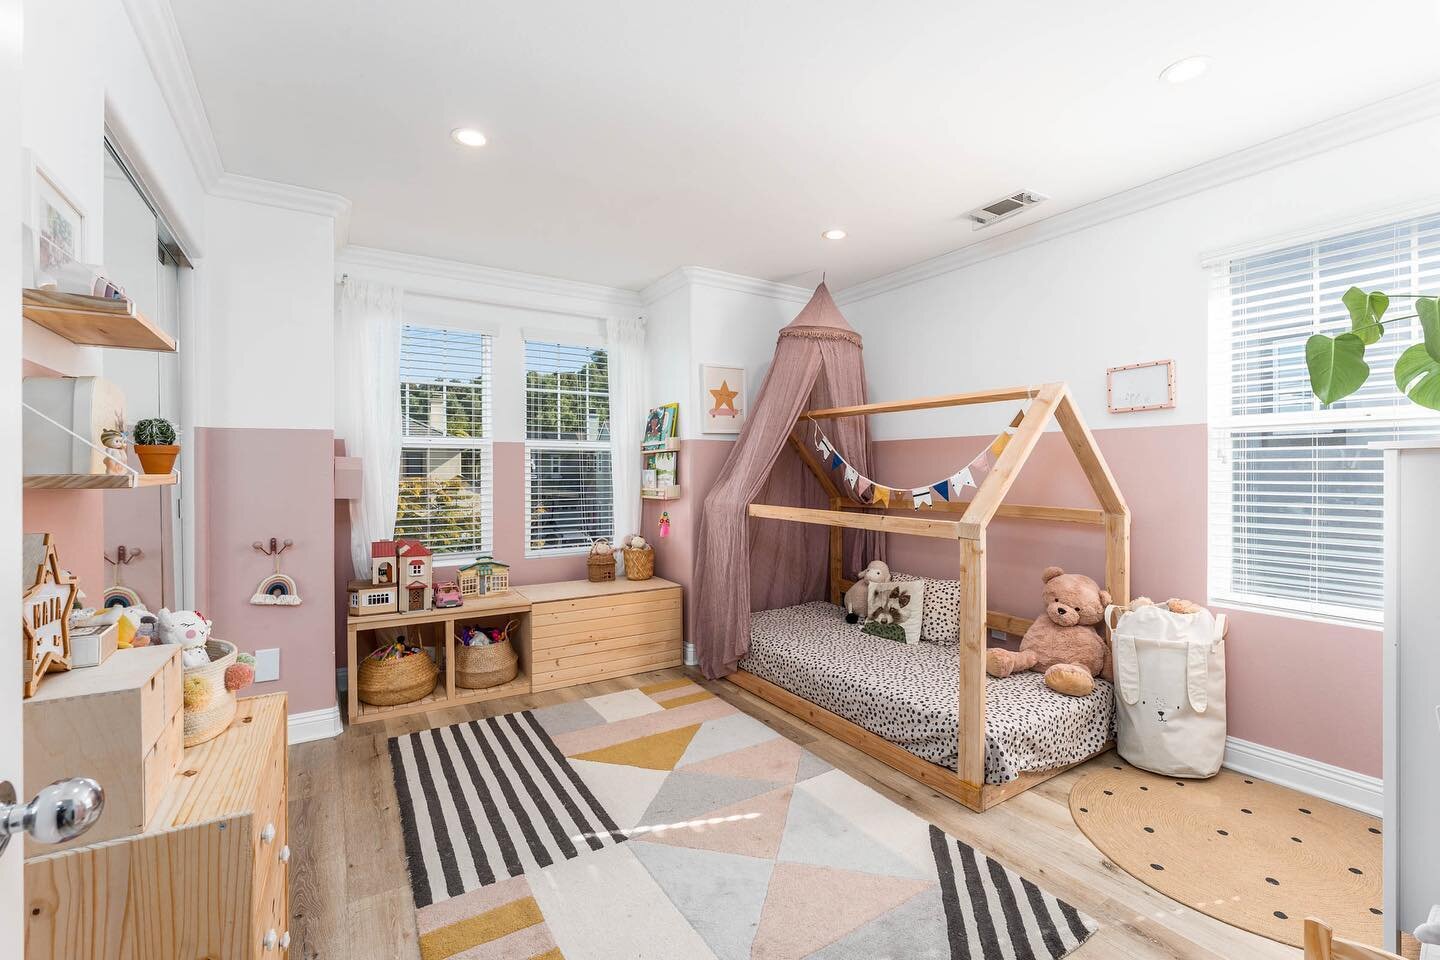 The way the kids rooms are furnished on this Ladera Ranch listing was awesome. If I had kids this would be the way to go 🔥

Looking for high quality photos/video for your next listing? DM @inlandrealestatephotography for details or go to www.inlandr